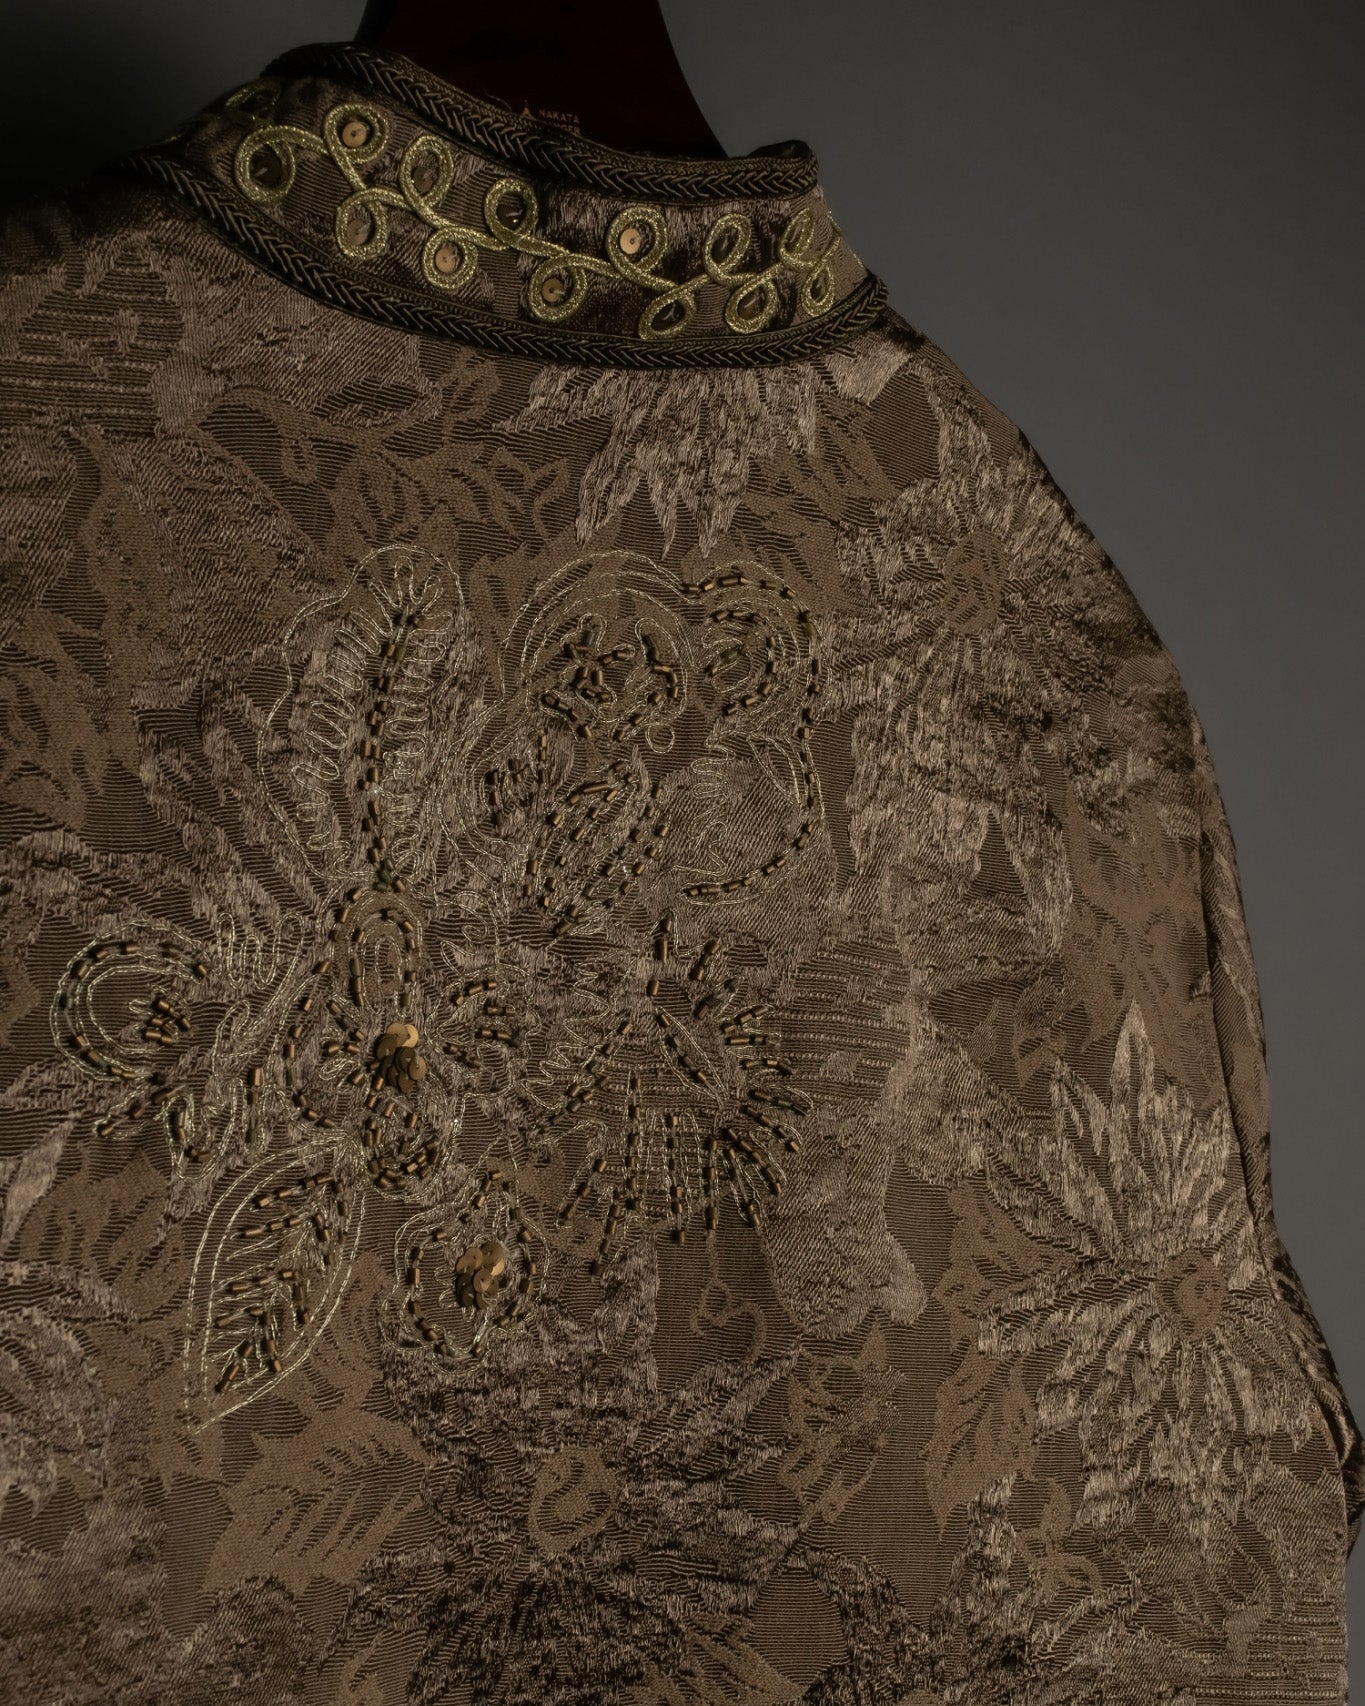 "MOOD SPECIAL" Artistic Flower Design Embroidery Jacket